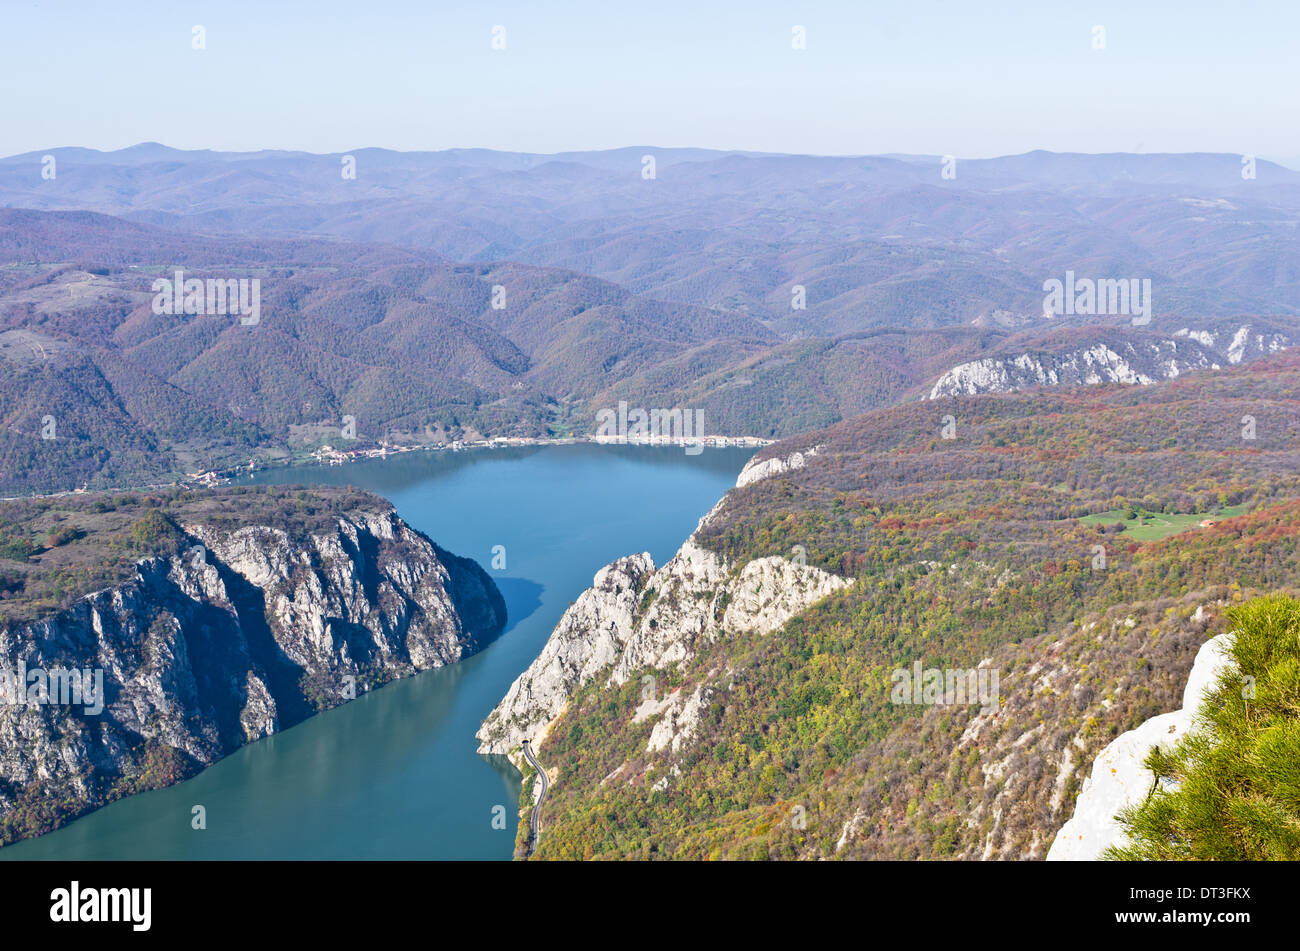 Cliffs over Danube river at the place where Djerdap gorge is narrowest Stock Photo